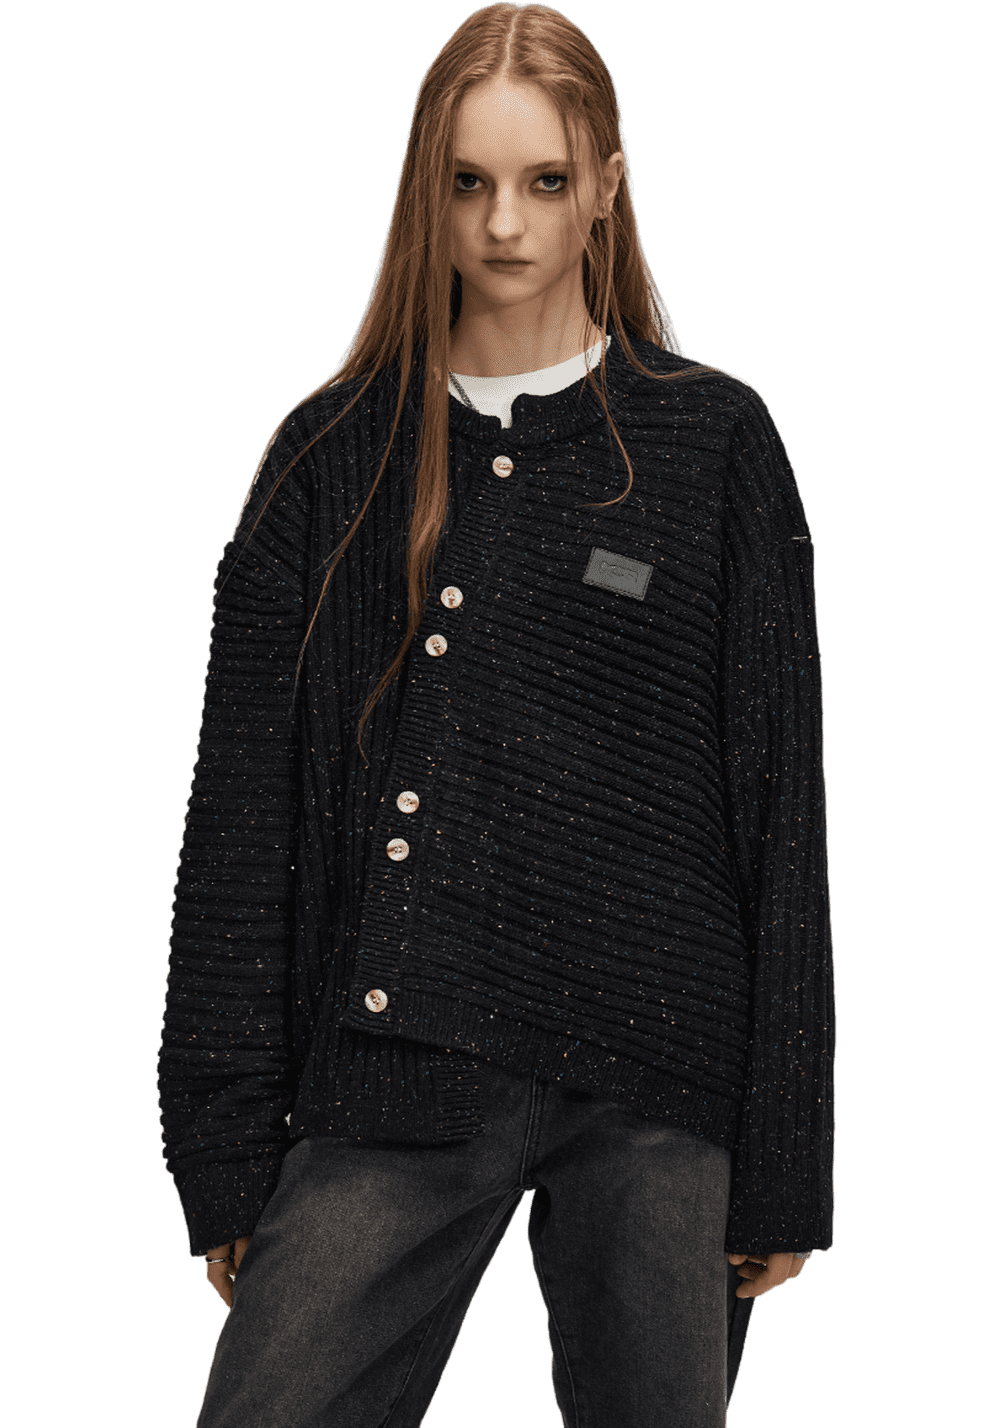 Asymmetric Wool Textured Knitted Jacket